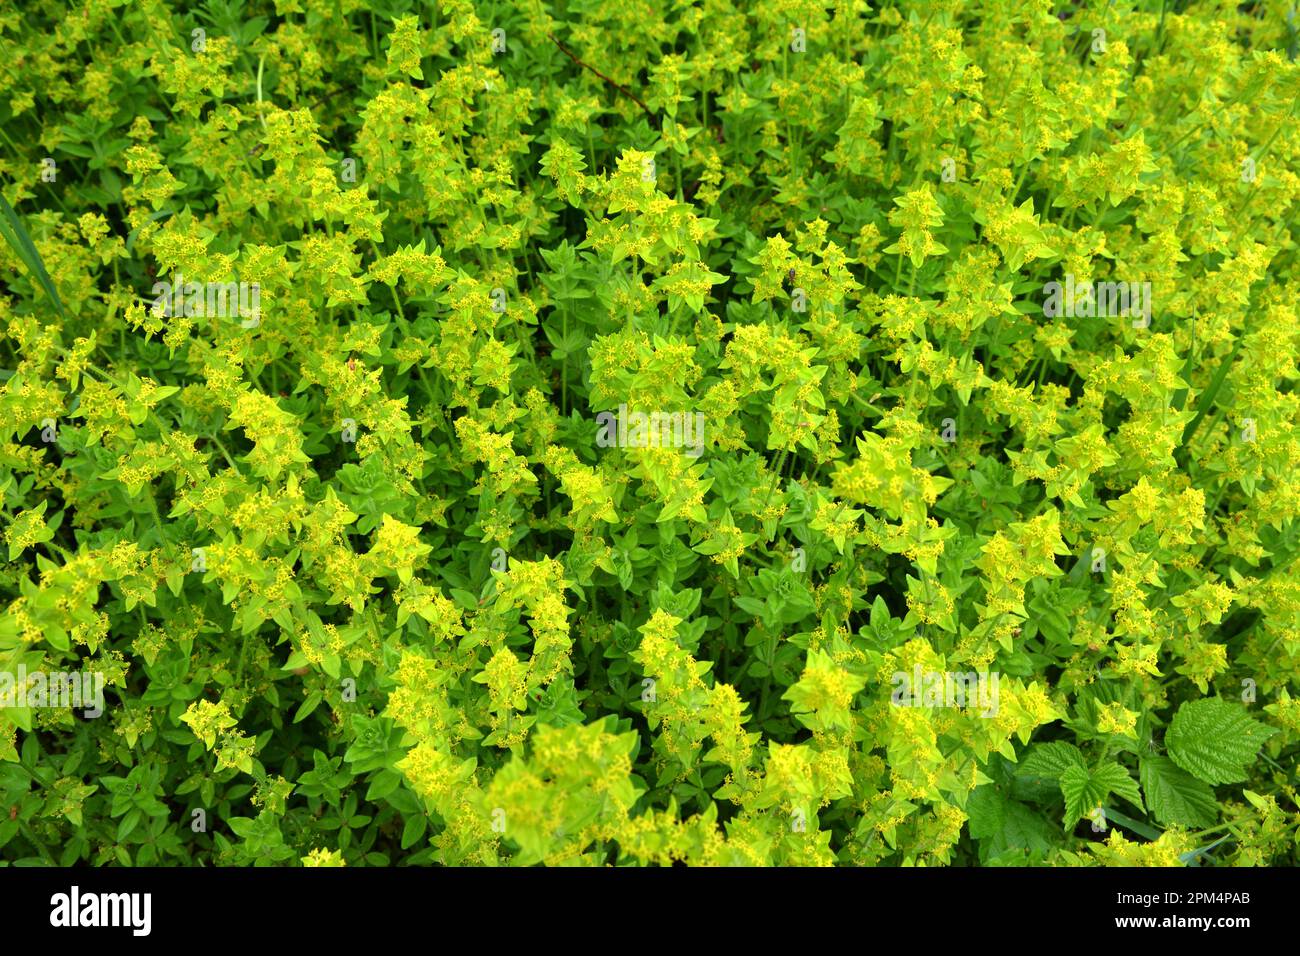 Cruciata laevipes grows among grasses in the wild Stock Photo